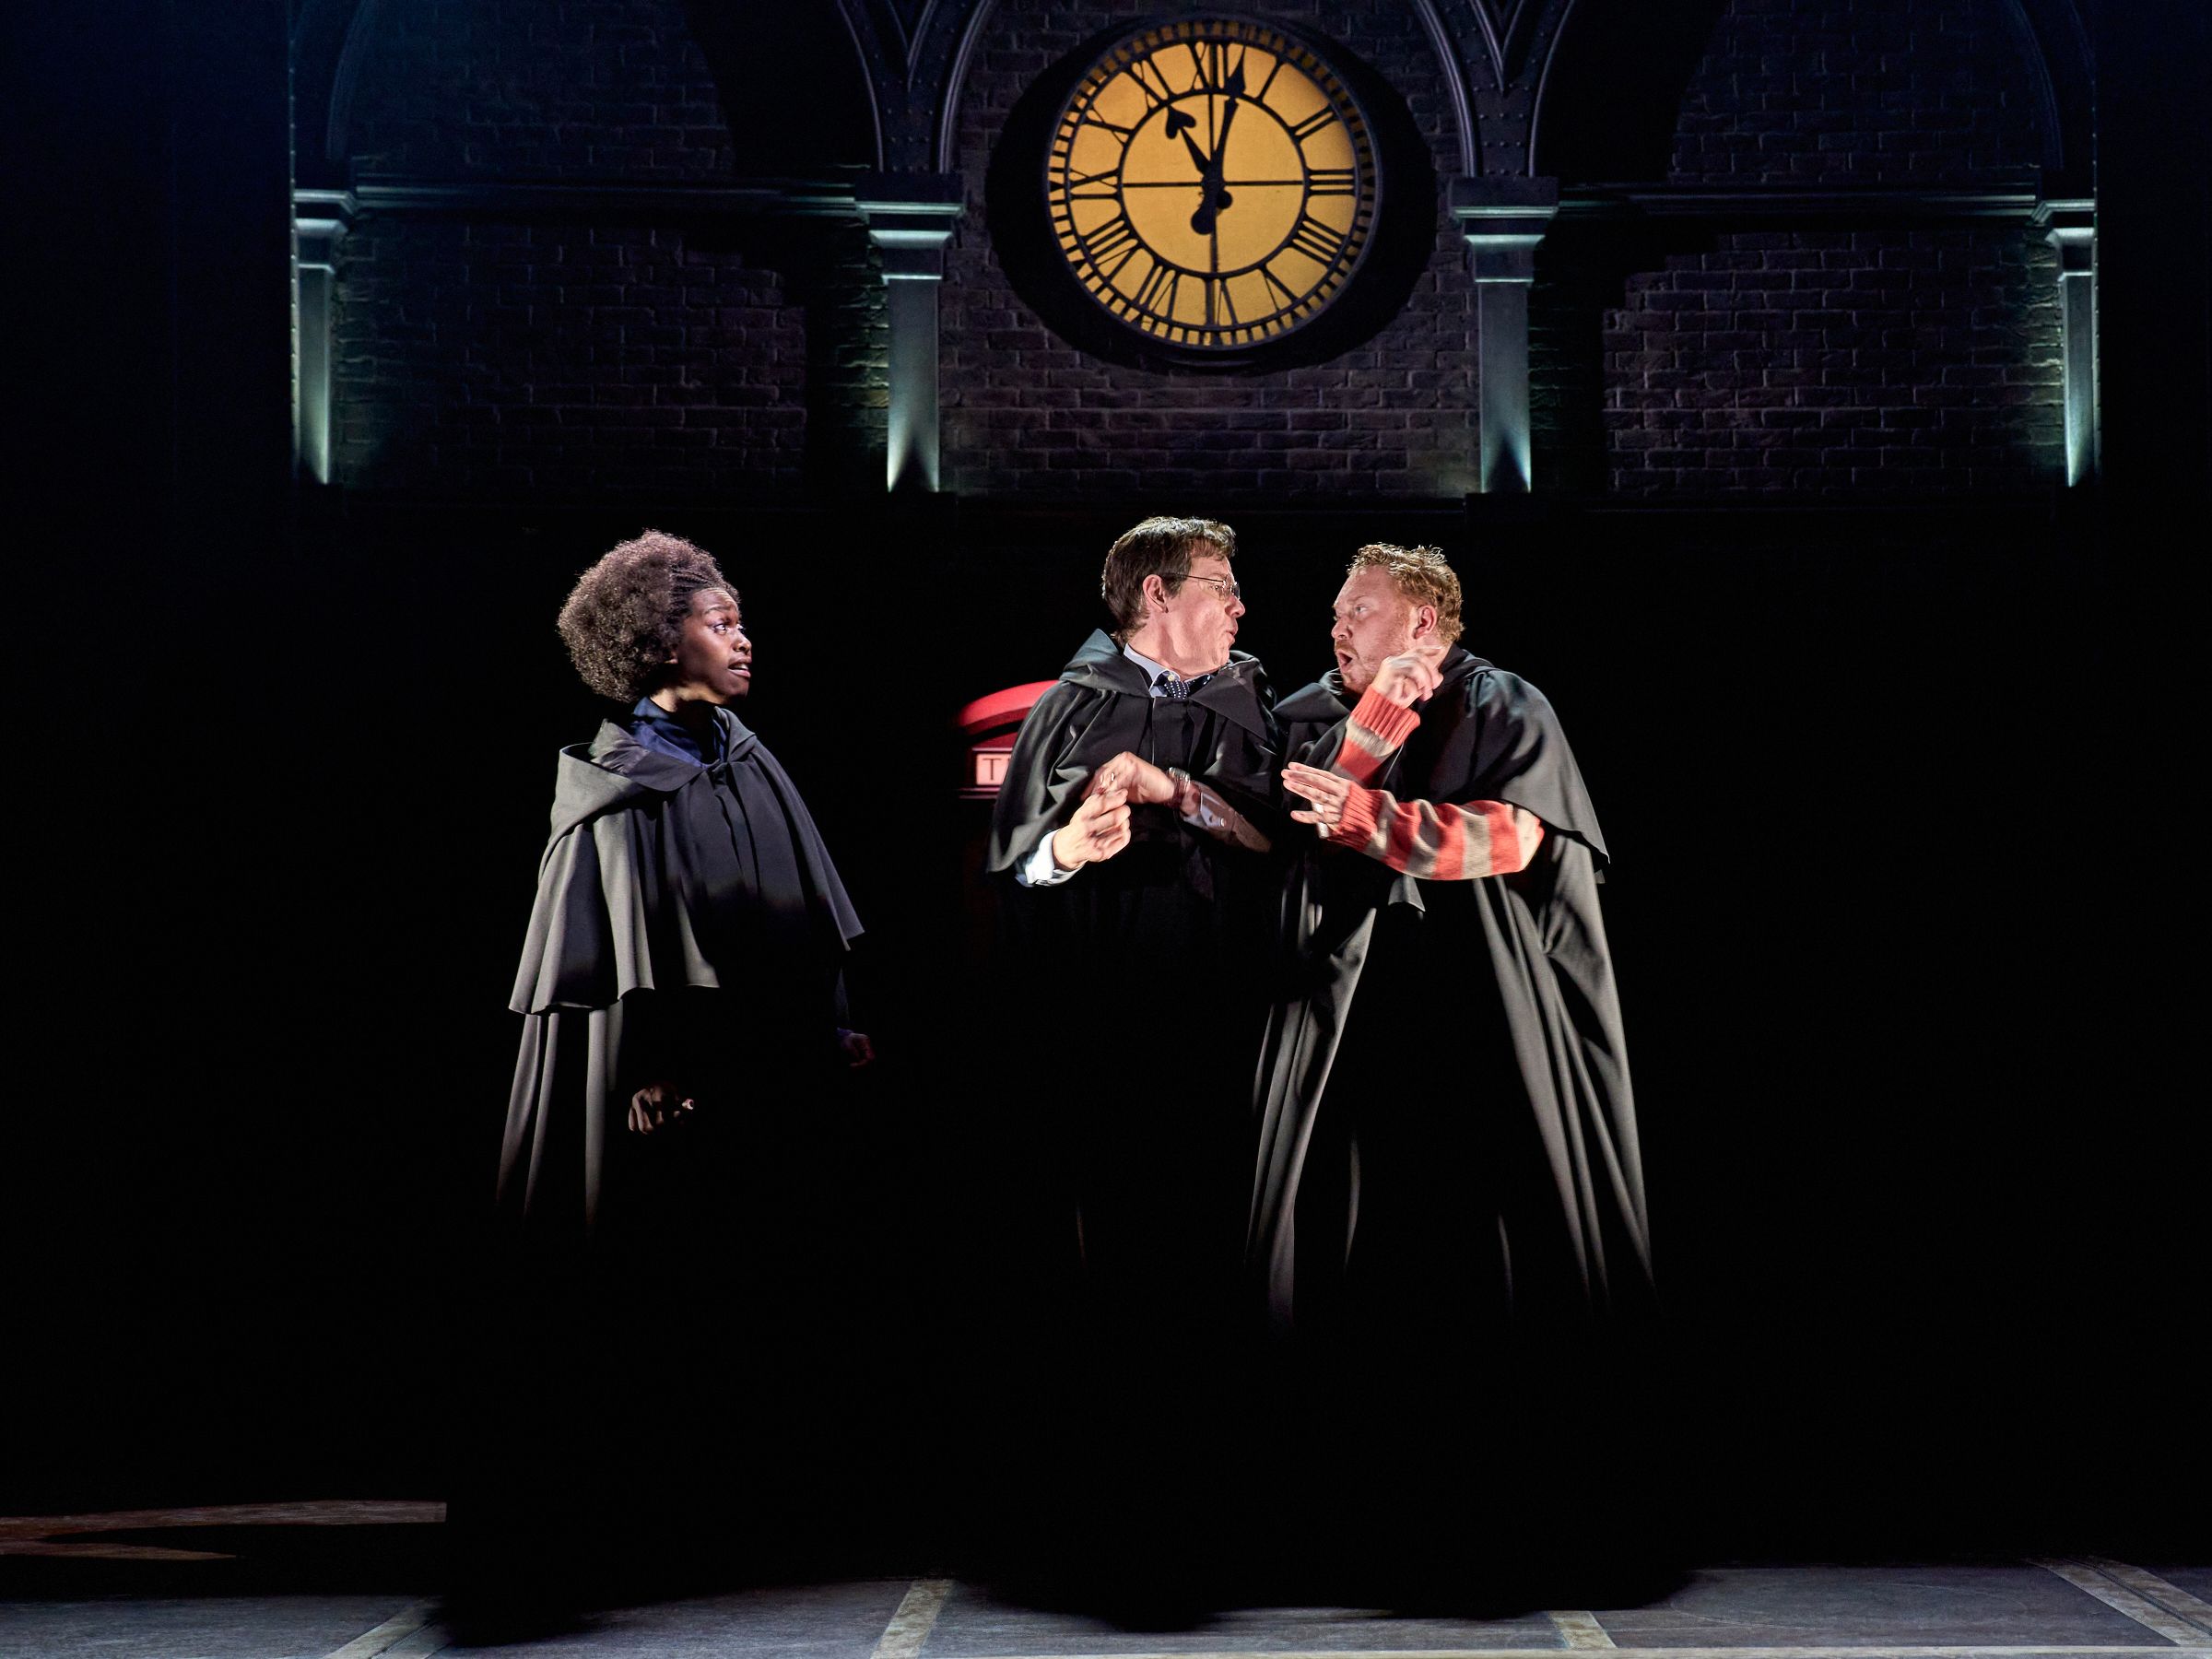 Harry, Ron, and Hermione in “Harry Potter and the Cursed Child” London